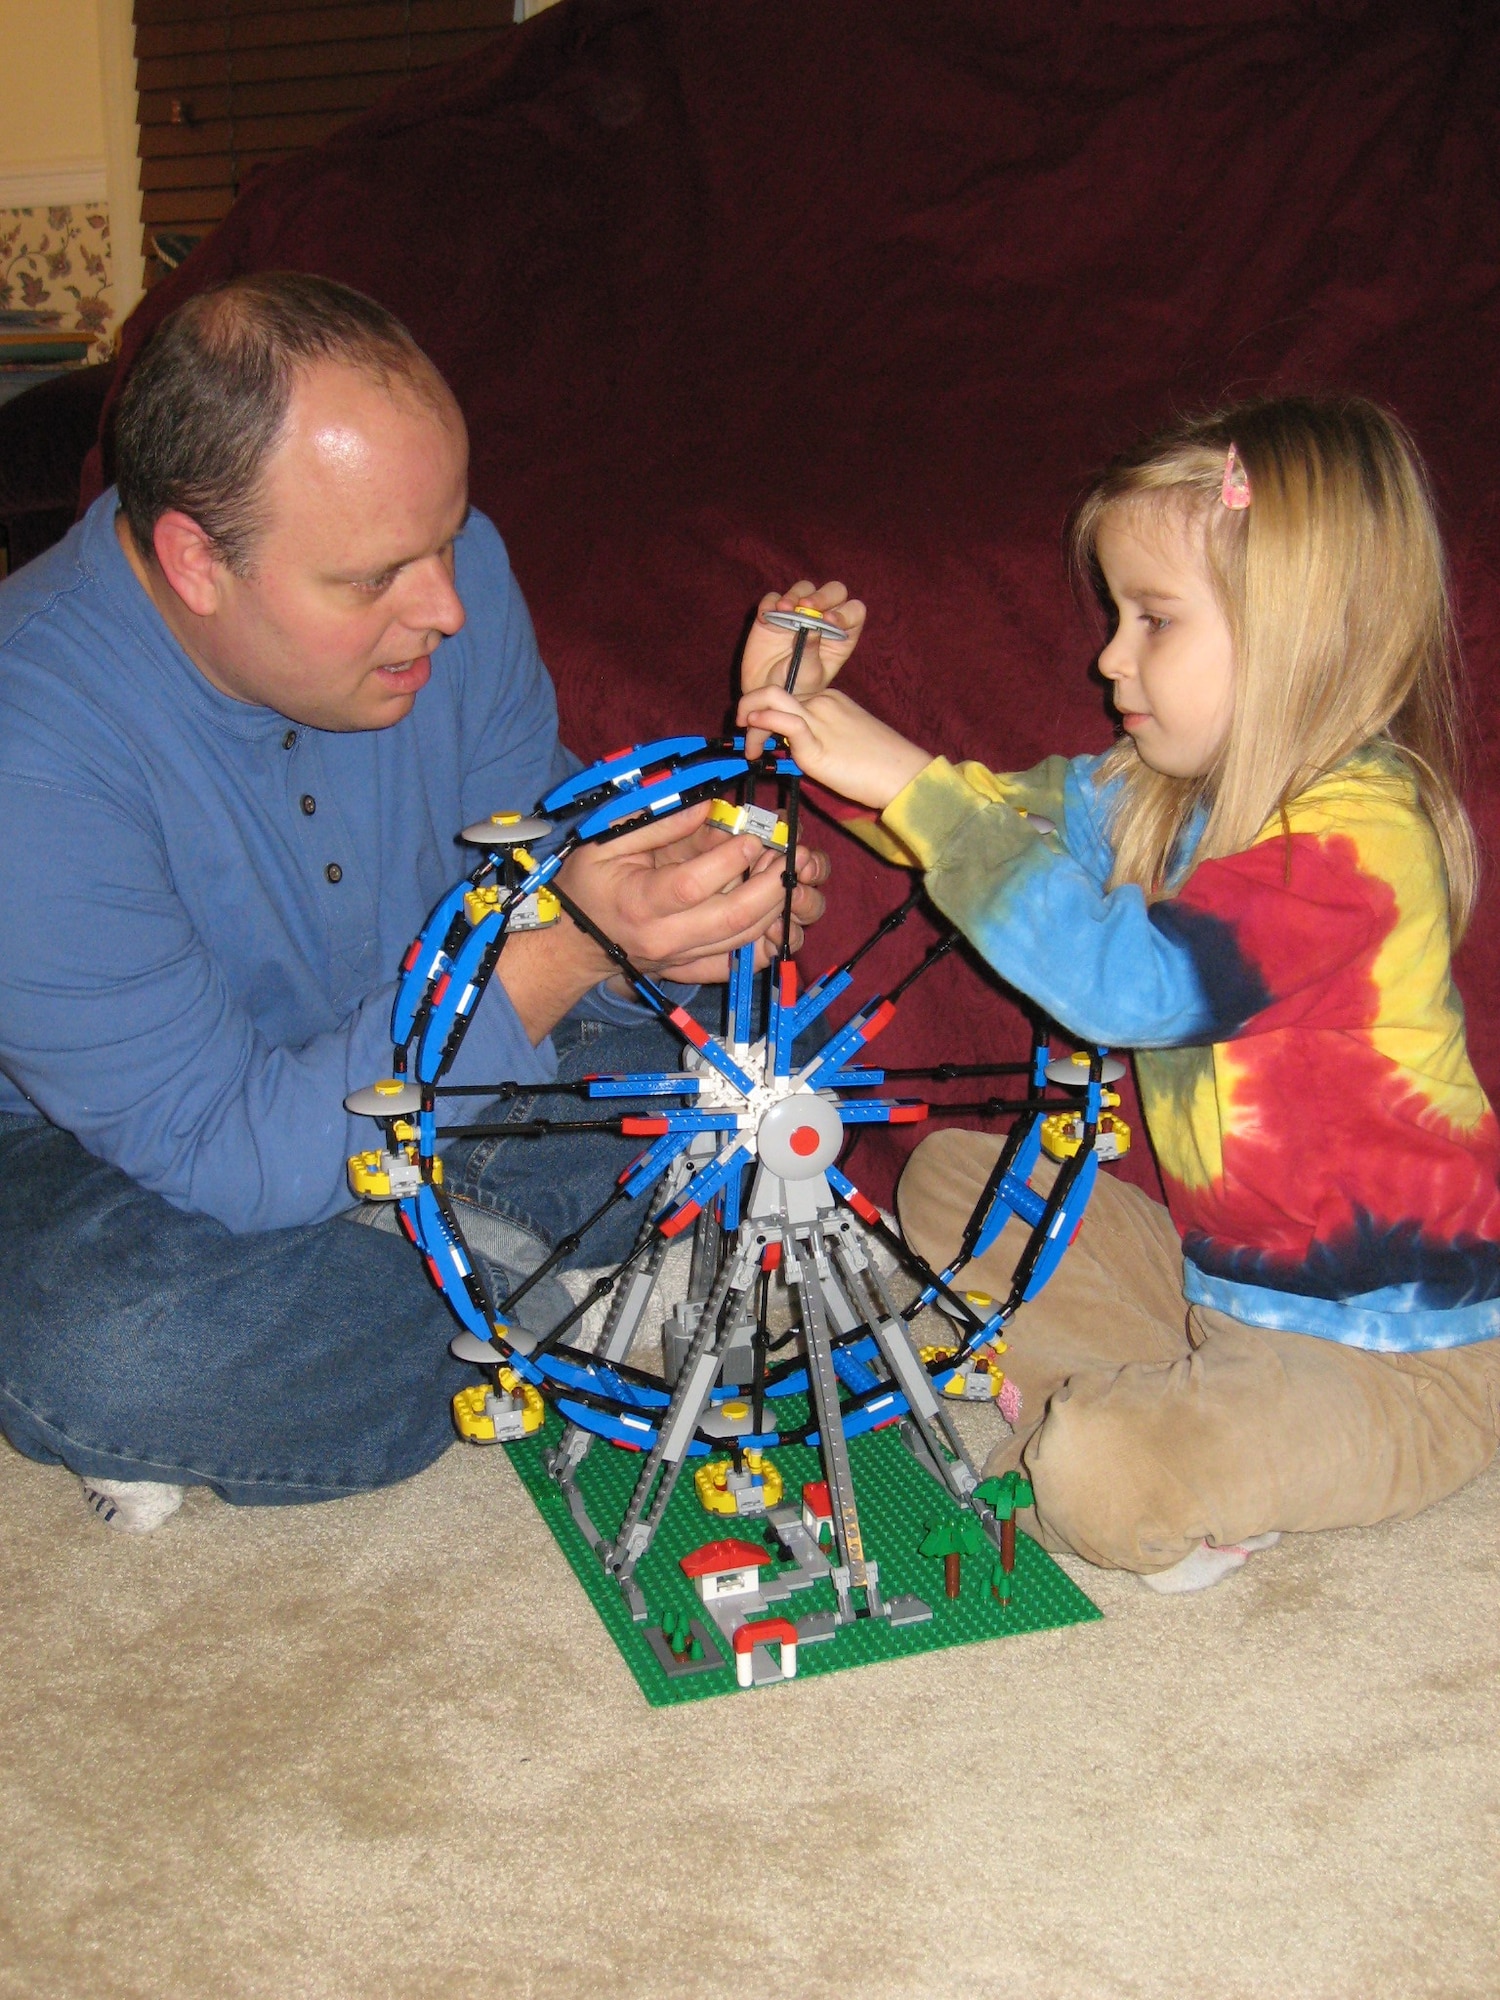 Aerospace Testing Alliance's (ATA) Will Vodra and his daughter Courtney assemble the last gondola on a Lego Ferris wheel. ATA is the support contractor for AEDC's Tunnel 9 facility, the NFAC and for the main complex in Tennessee.  (Photo provided)